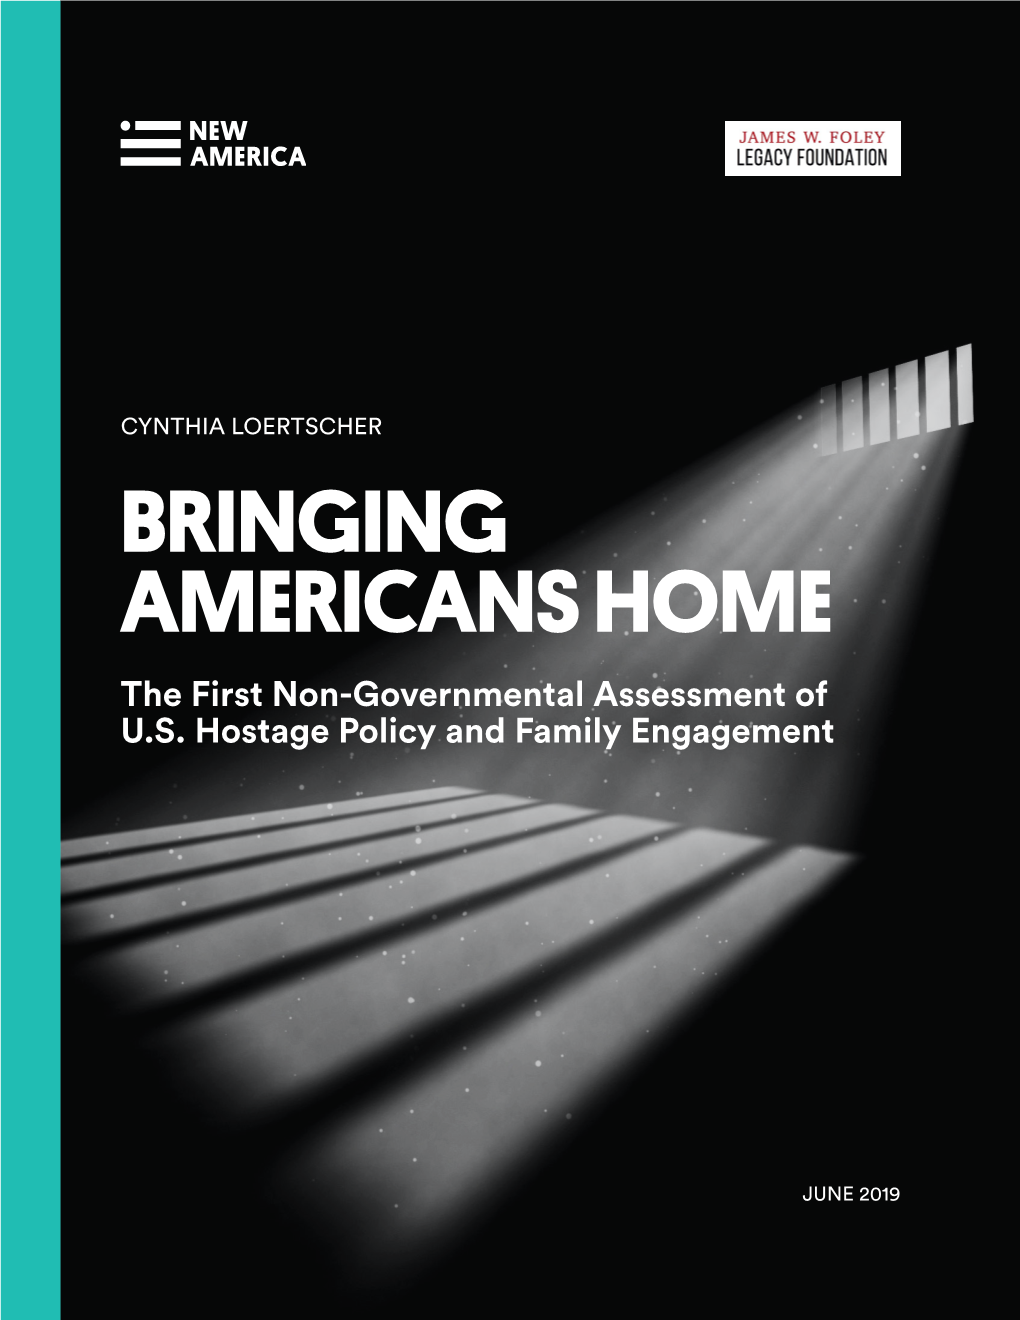 BRINGING AMERICANS HOME the First Non-Governmental Assessment of U.S